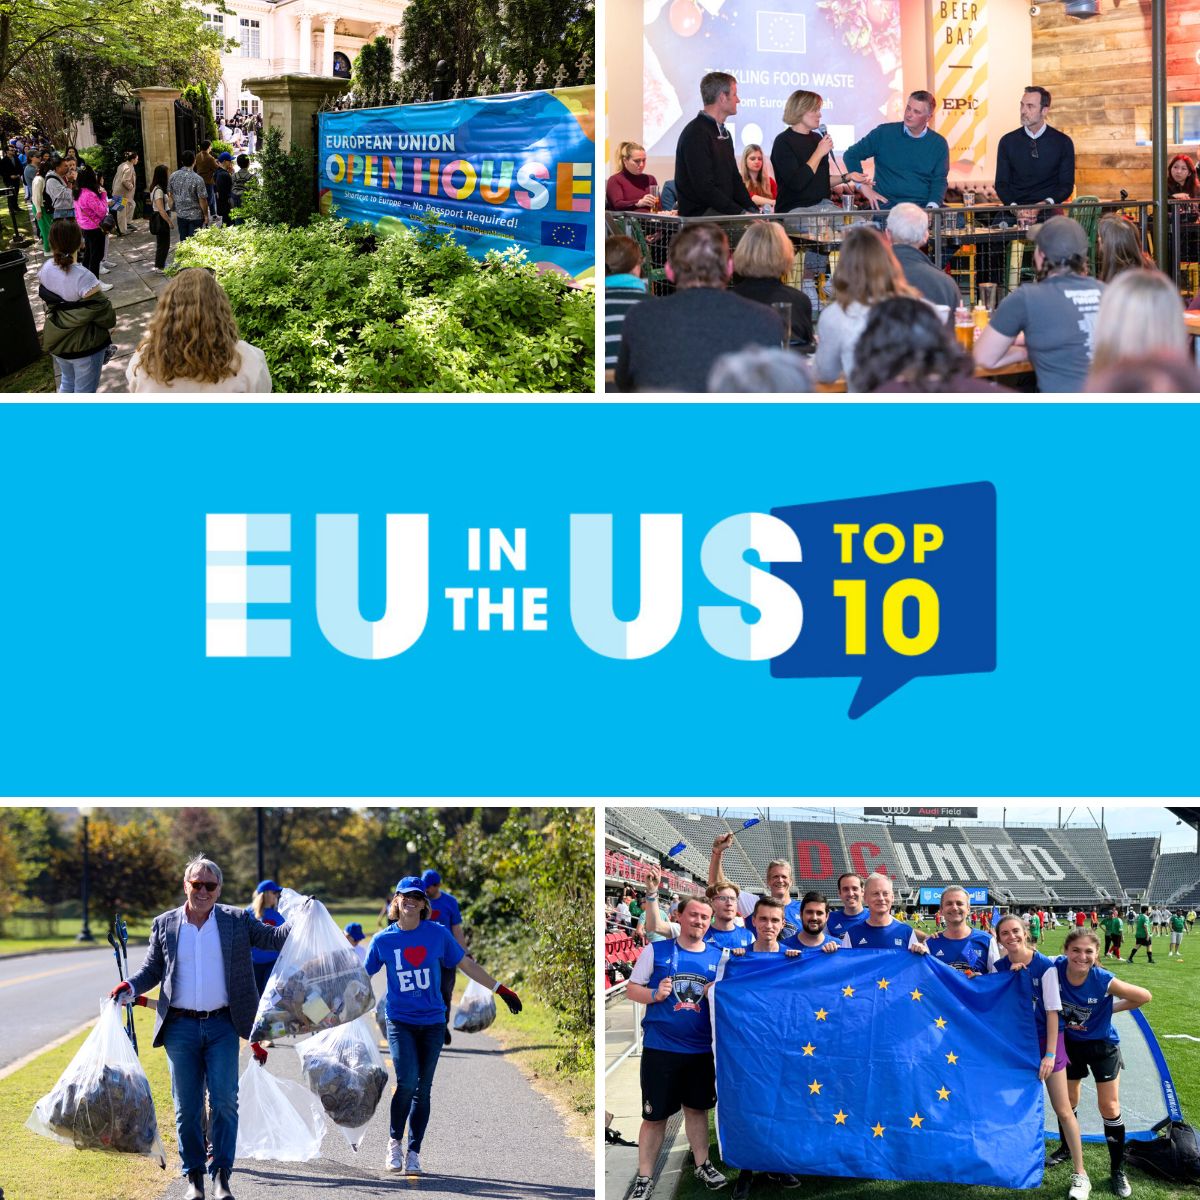 📰 Make sure you subscribe to our revamped, bi-weekly EU in the U.S. Top 10 newsletter! Once a week, we will send updates on 🇪🇺🇺🇸 policy developments, invitations to events, job vacancies, news from @EUAmbUS, and more. bit.ly/EUintheUSTop10